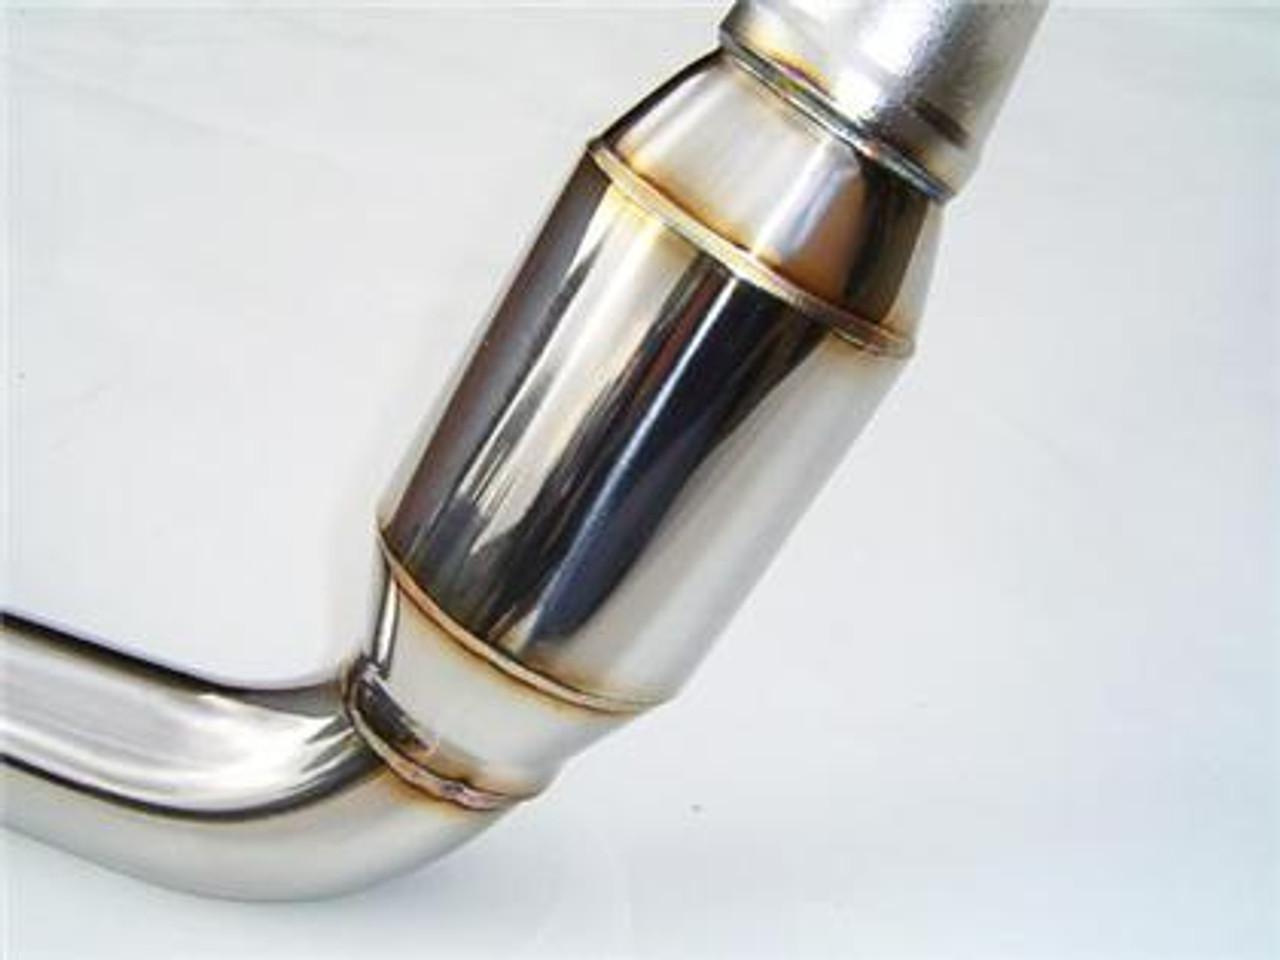 Invidia 05+ LGT (automatic transmission) Polished Divorced Waste Gate Downpipe with High Flow Cat